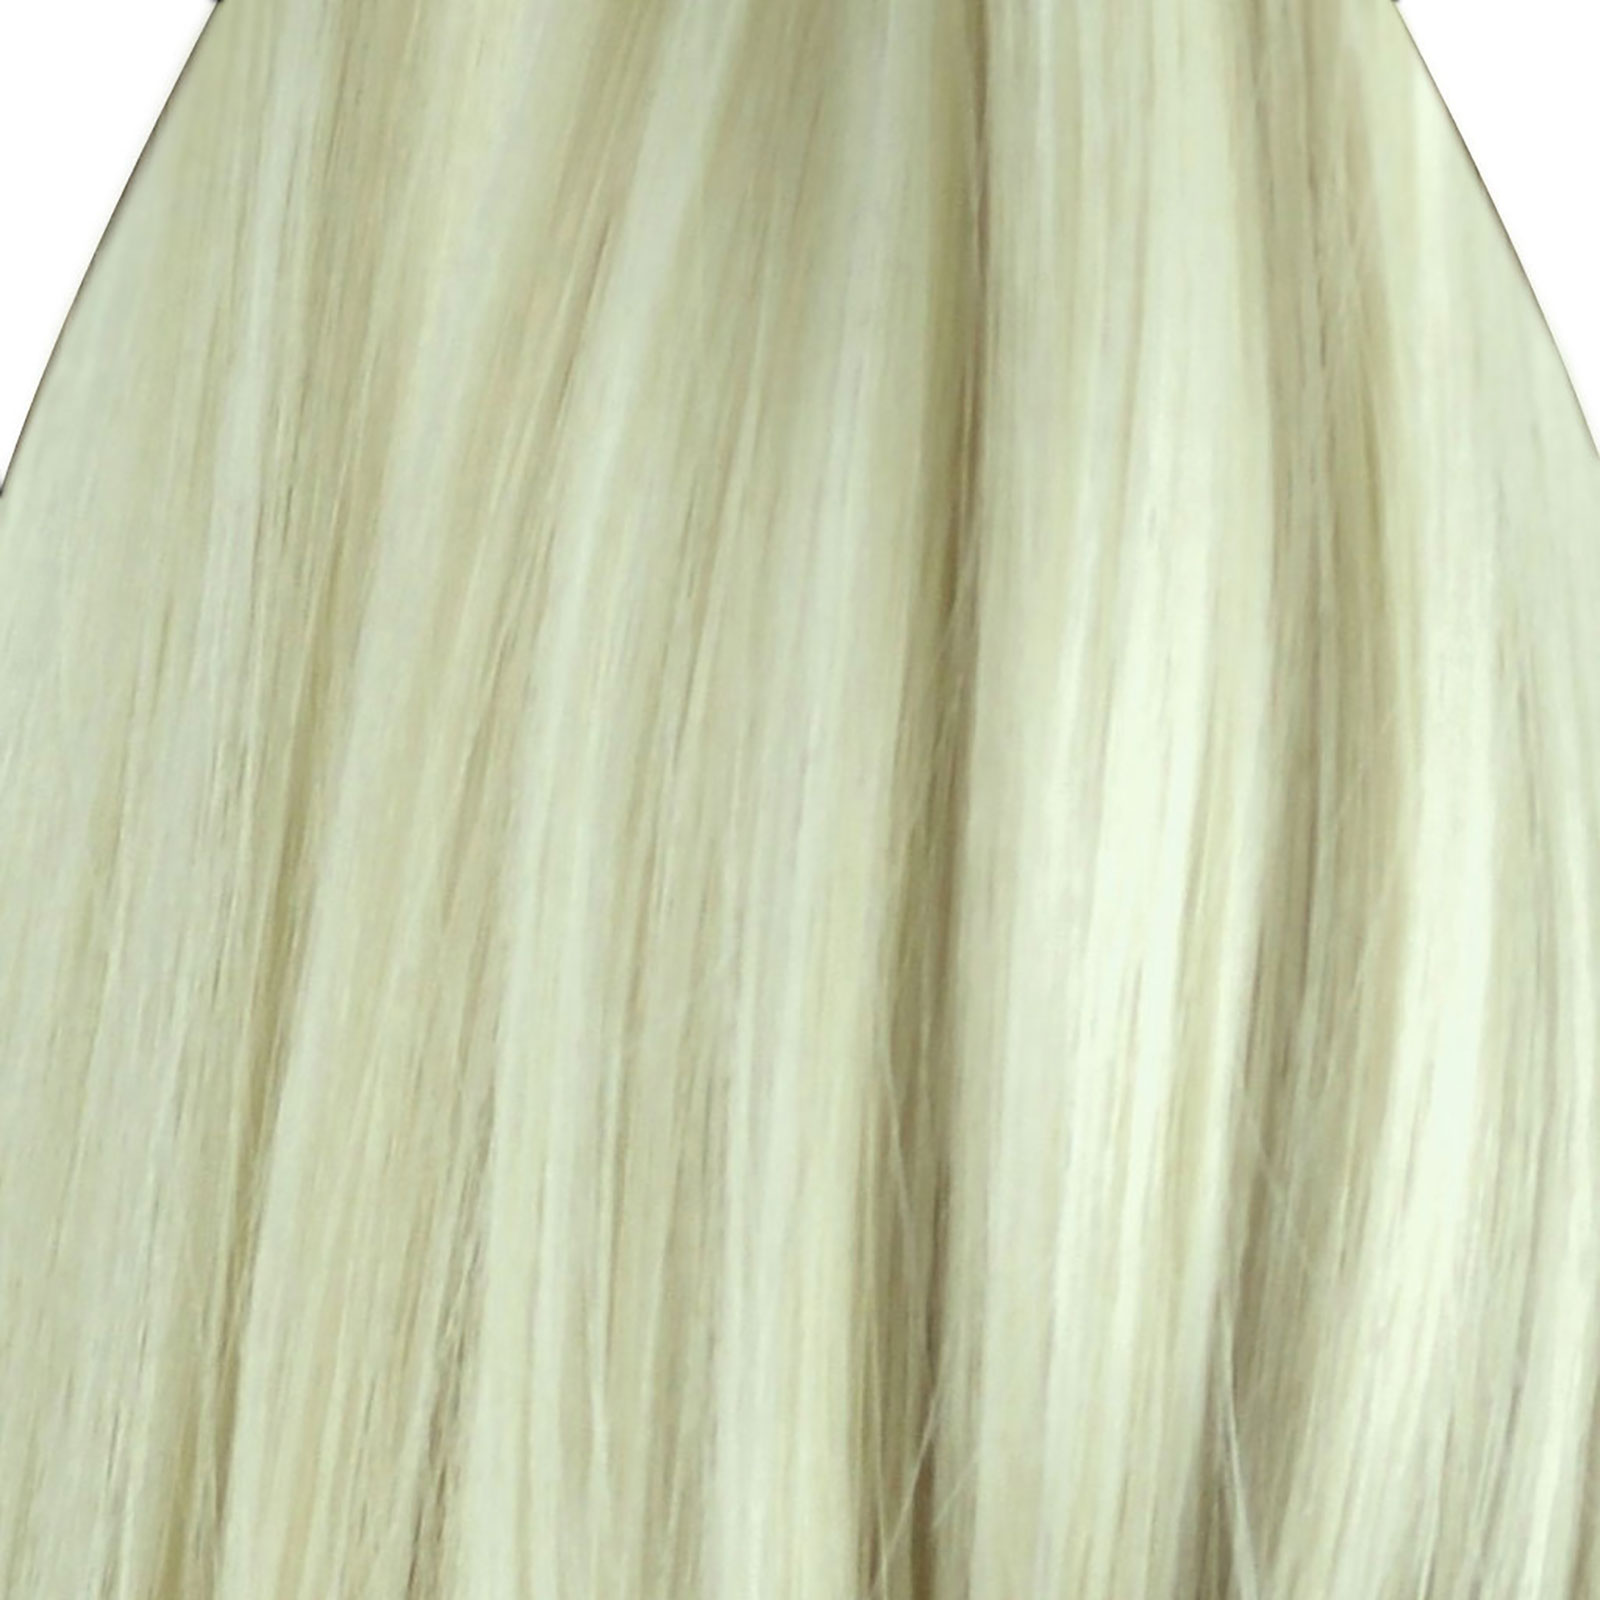 20 Clip In One Piece Straight Swedish Blonde 22a Full Head 1pc